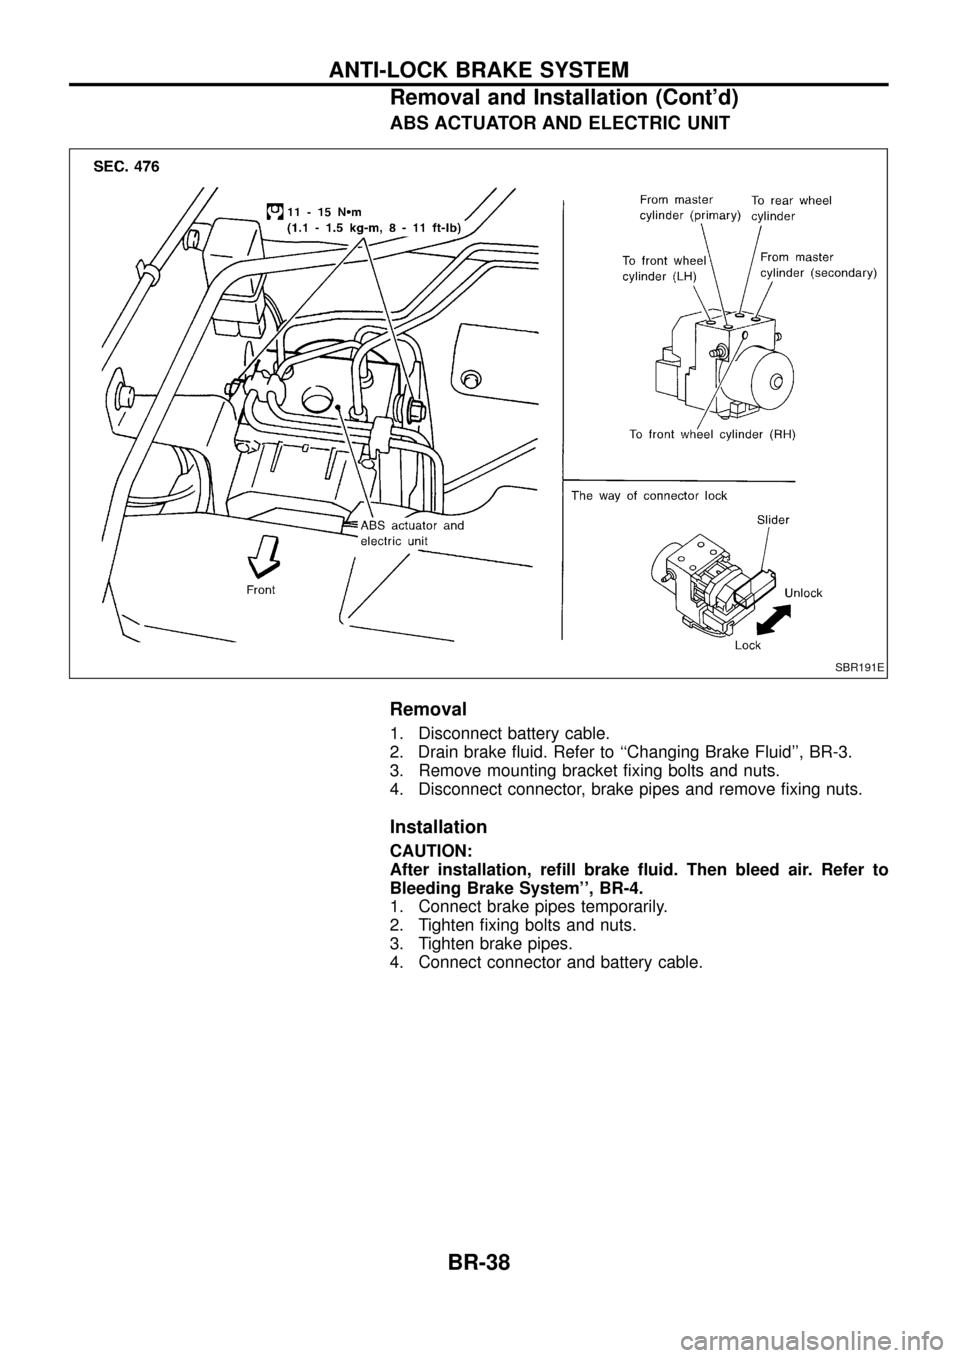 NISSAN PATROL 1998 Y61 / 5.G Brake System User Guide ABS ACTUATOR AND ELECTRIC UNIT
Removal
1. Disconnect battery cable.
2. Drain brake ¯uid. Refer to ``Changing Brake Fluid, BR-3.
3. Remove mounting bracket ®xing bolts and nuts.
4. Disconnect conne